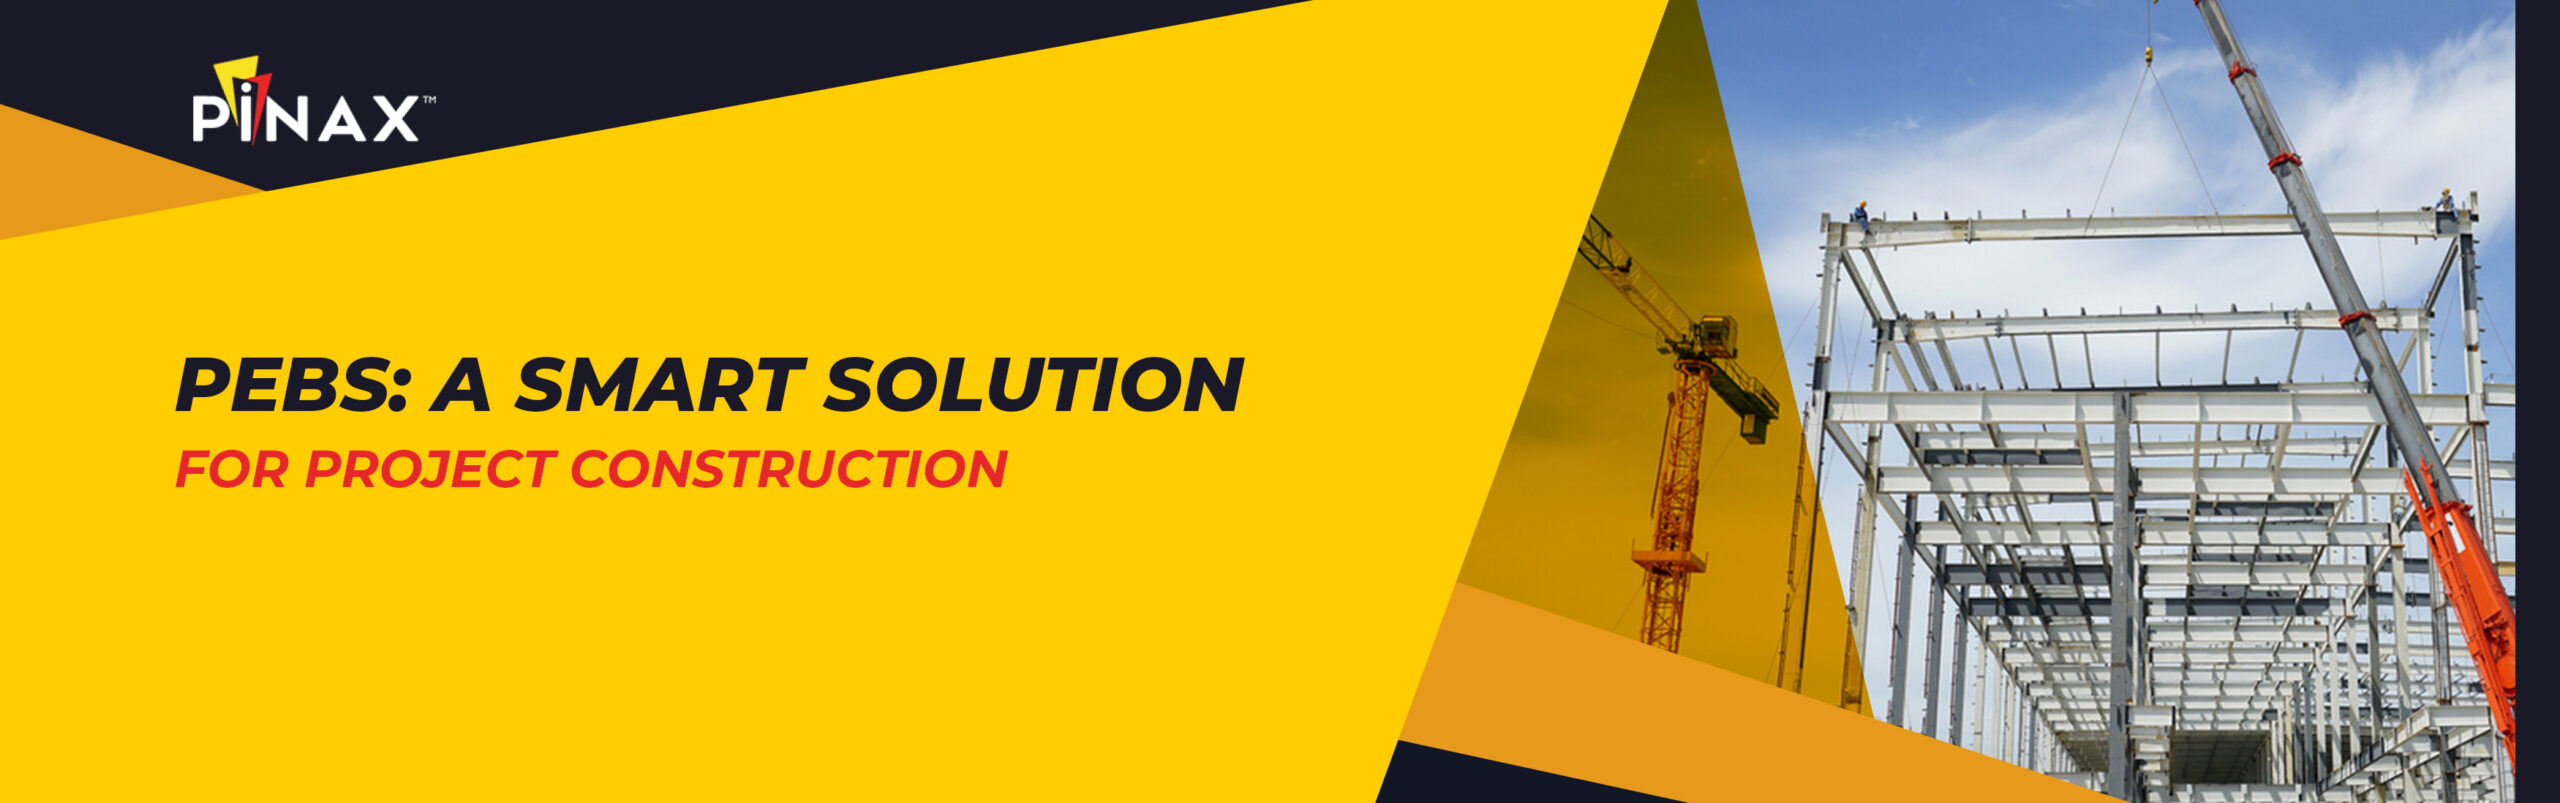 PEBs: A Smart Solution For Project Construction